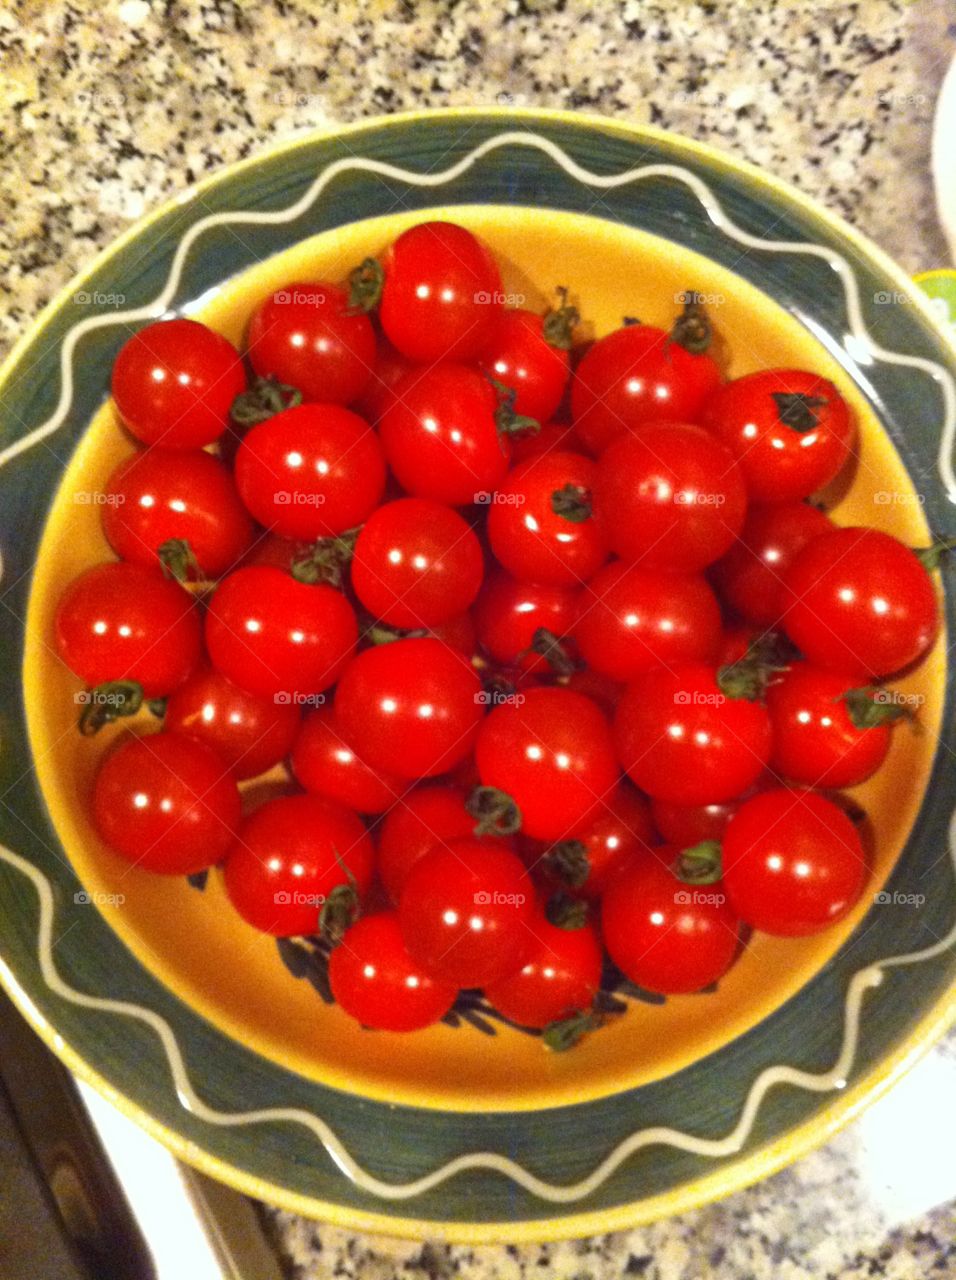 Shiny Red Tomatoes 